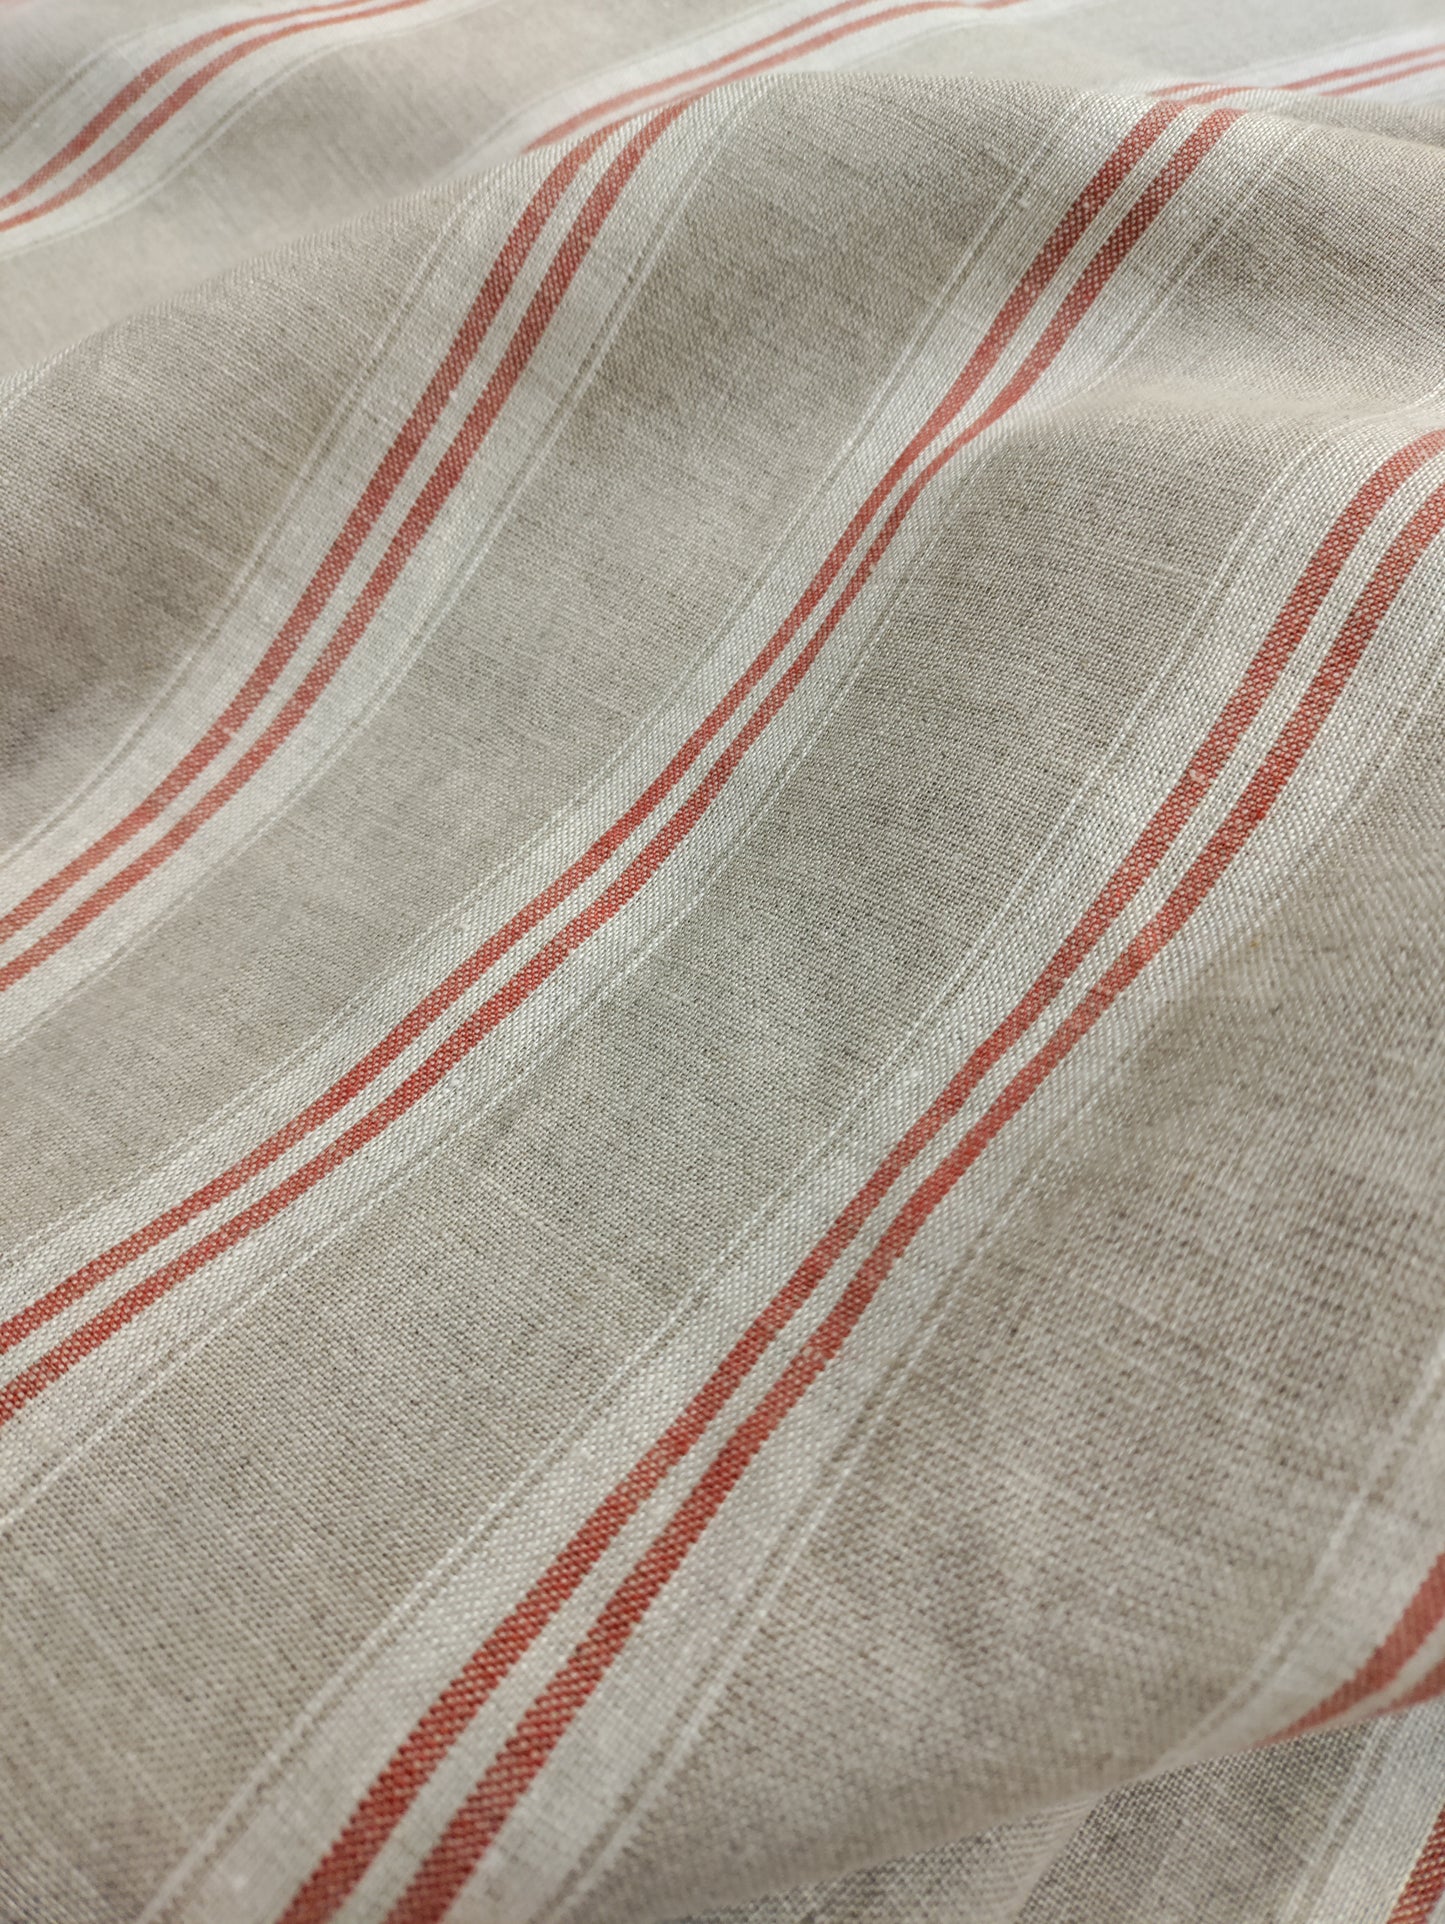 Washed Linen French Stripe - Red